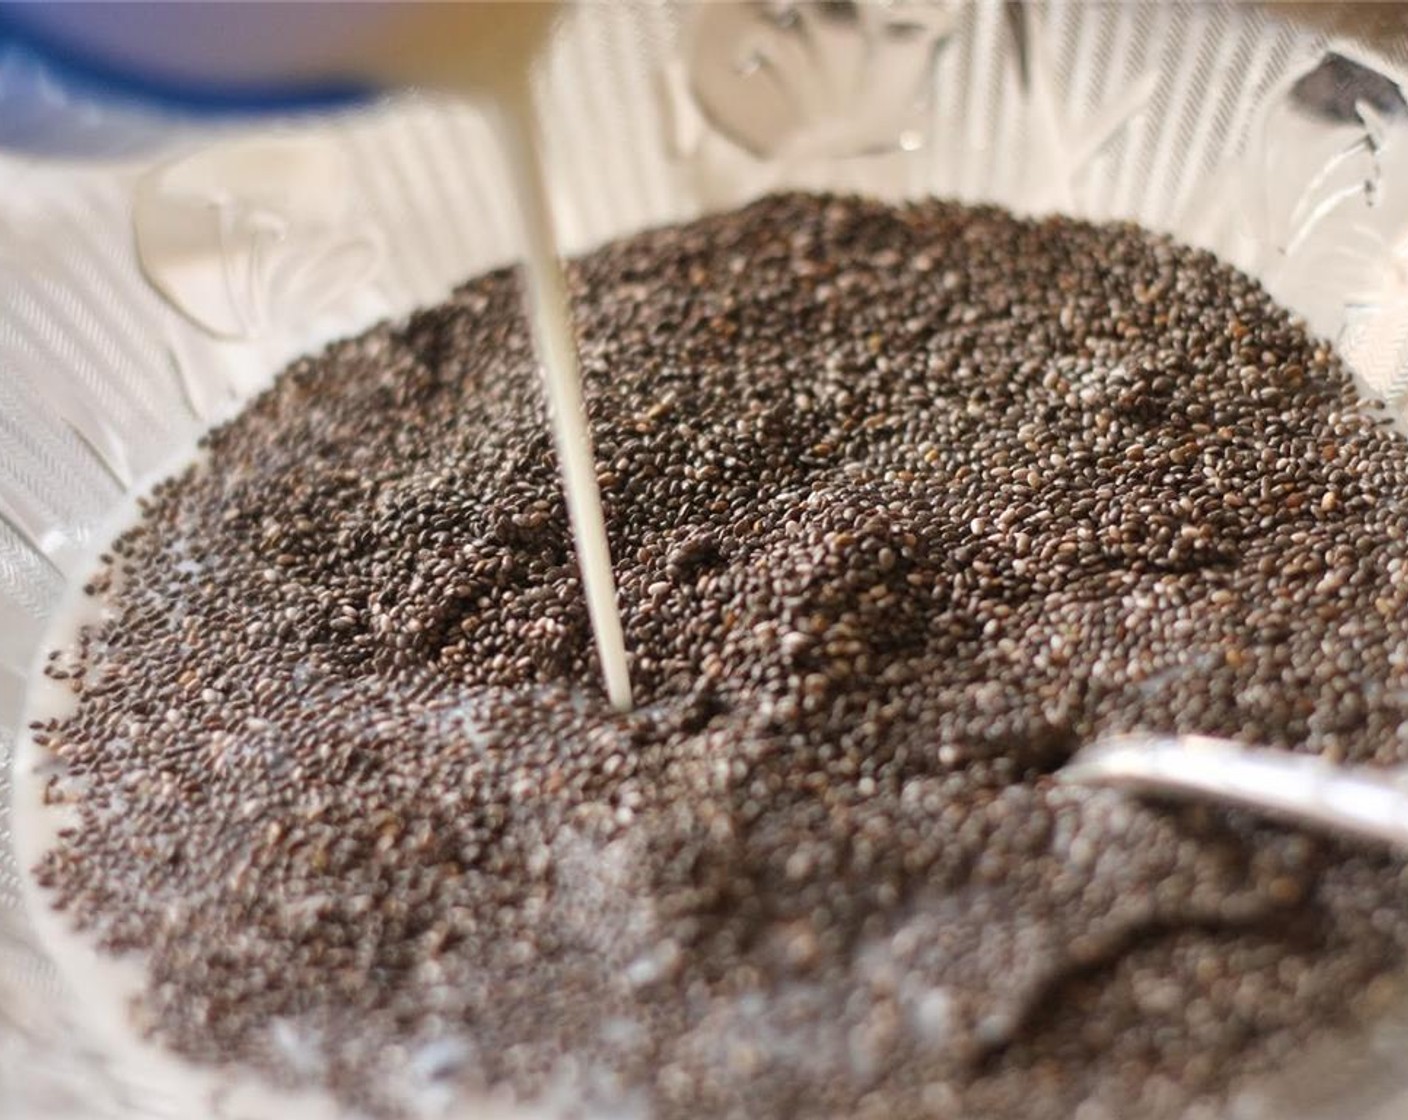 step 1 Put Chia Seeds (1/2 cup) in a bowl, and pour in Unsweetened Almond Milk (1 1/2 cups).